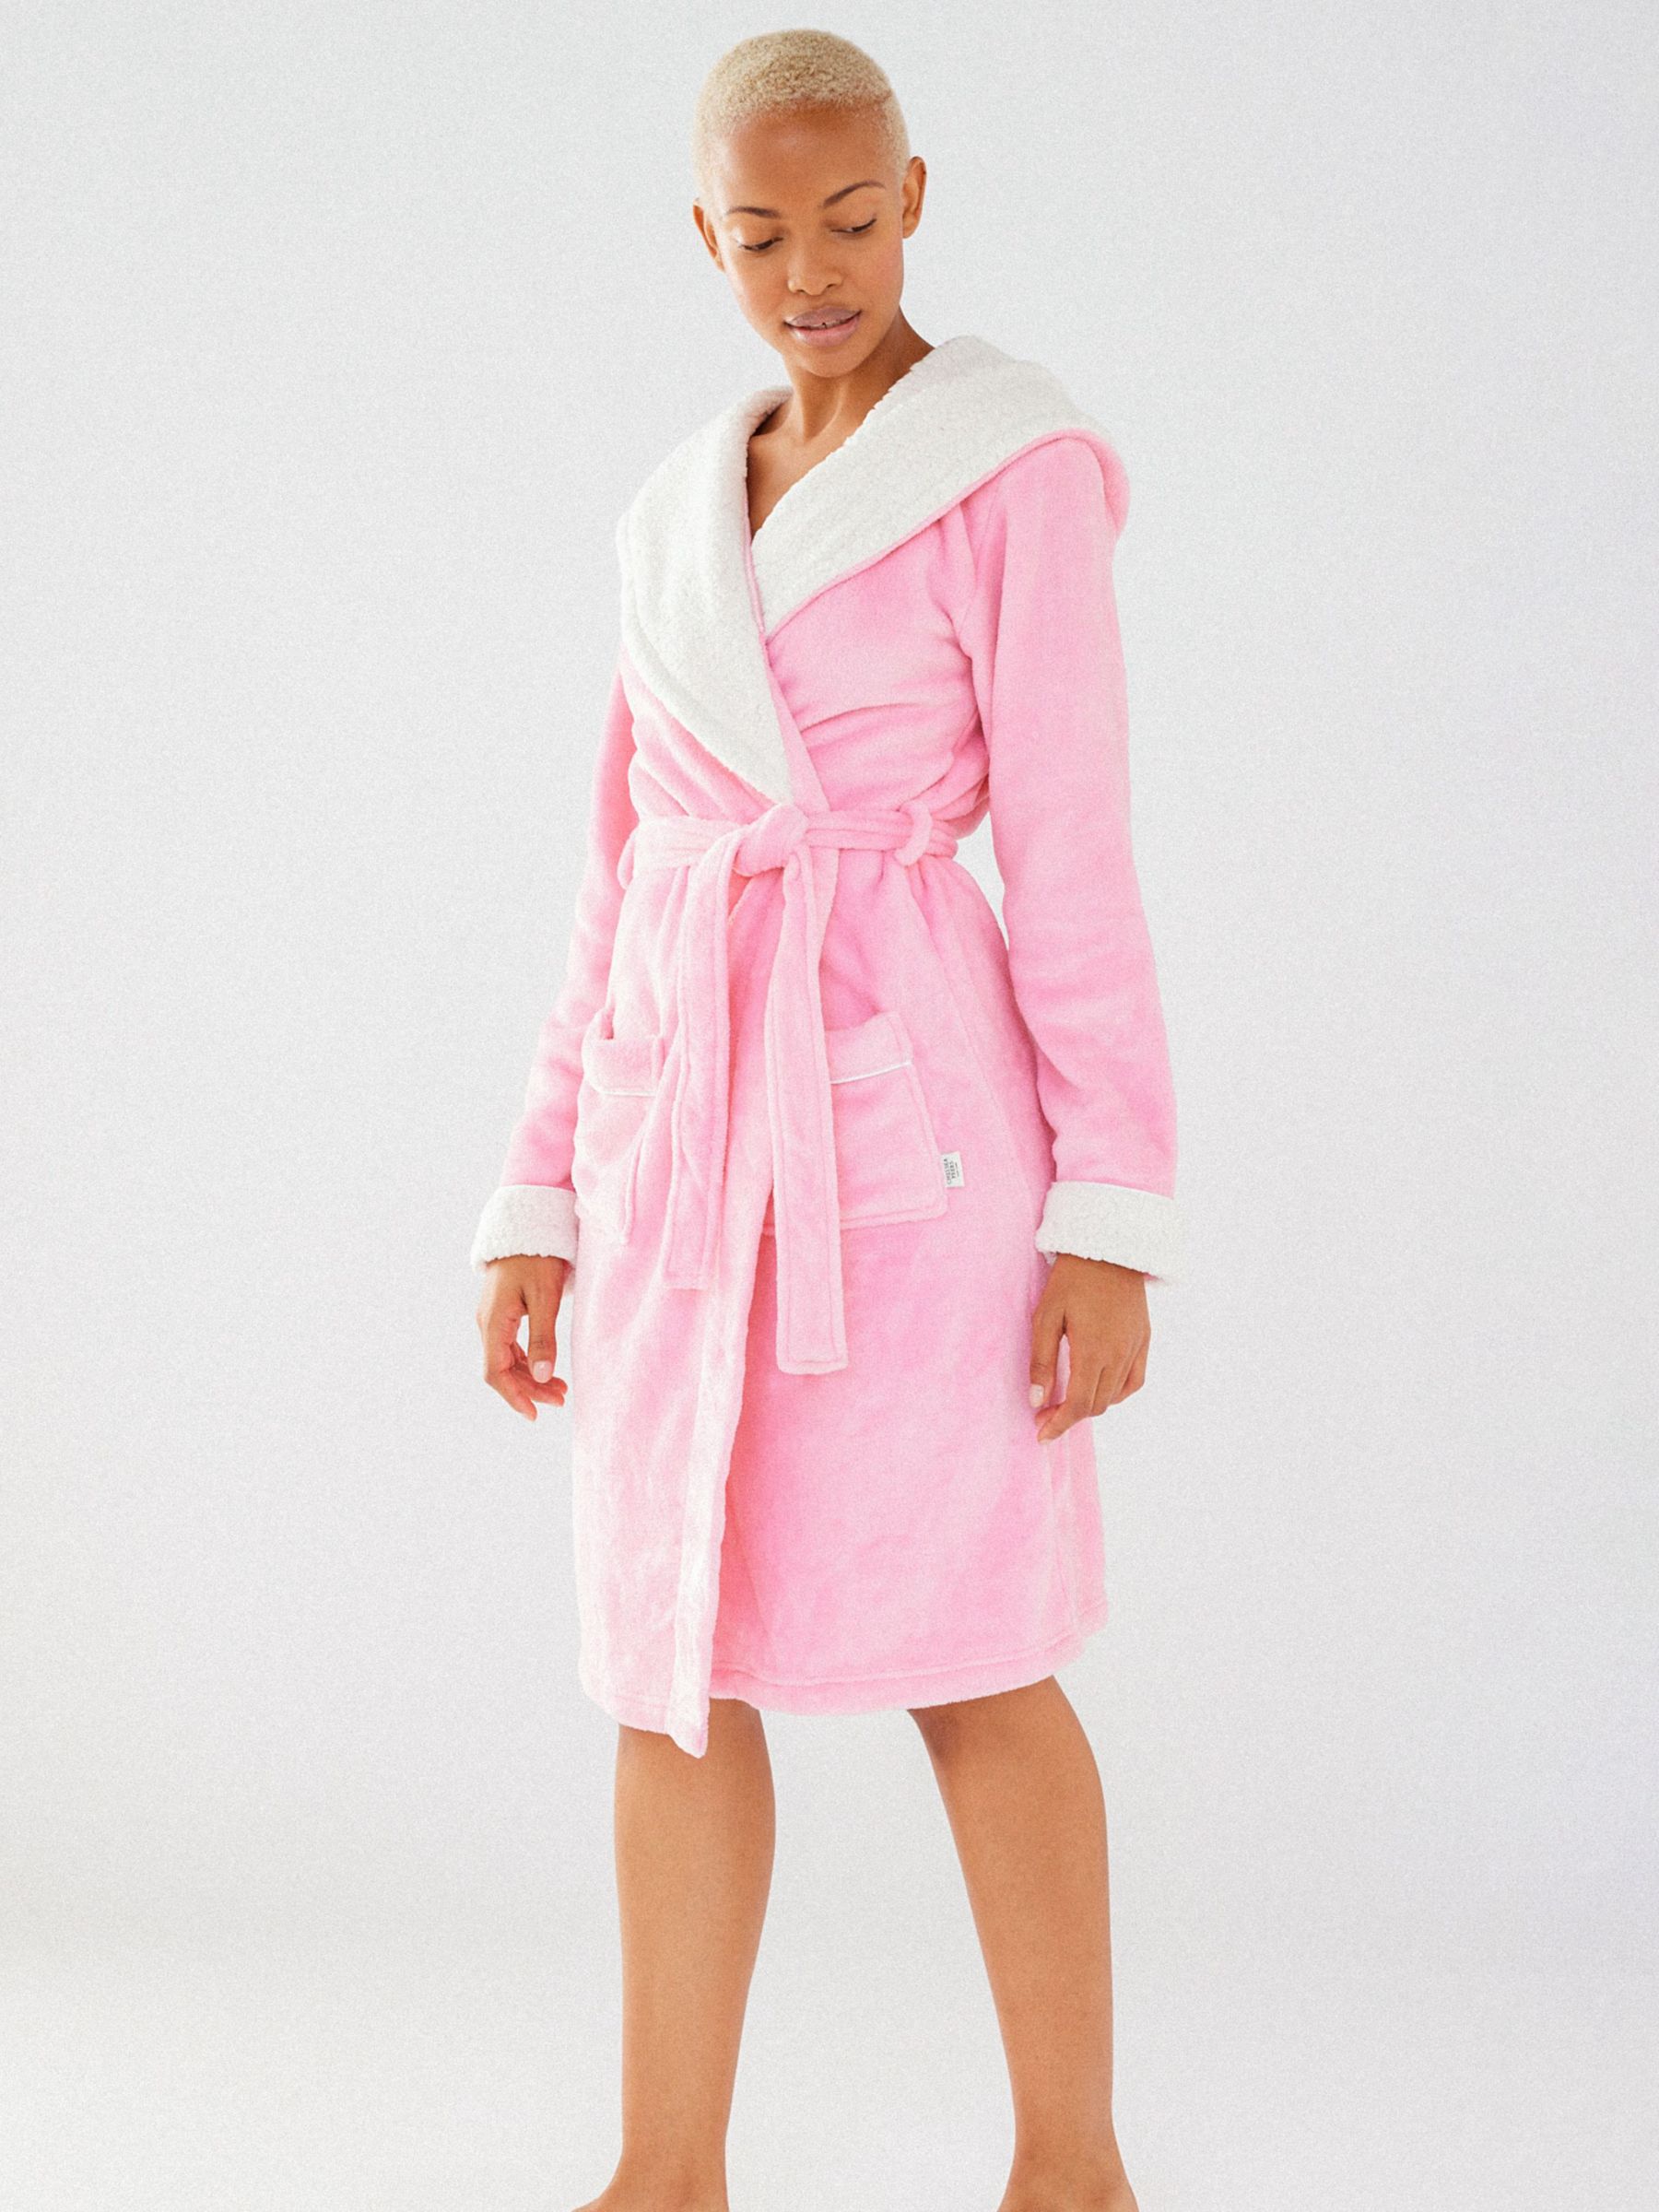 Chelsea Peers Plain Fluffy Hooded Dressing Gown, Cream at John Lewis &  Partners